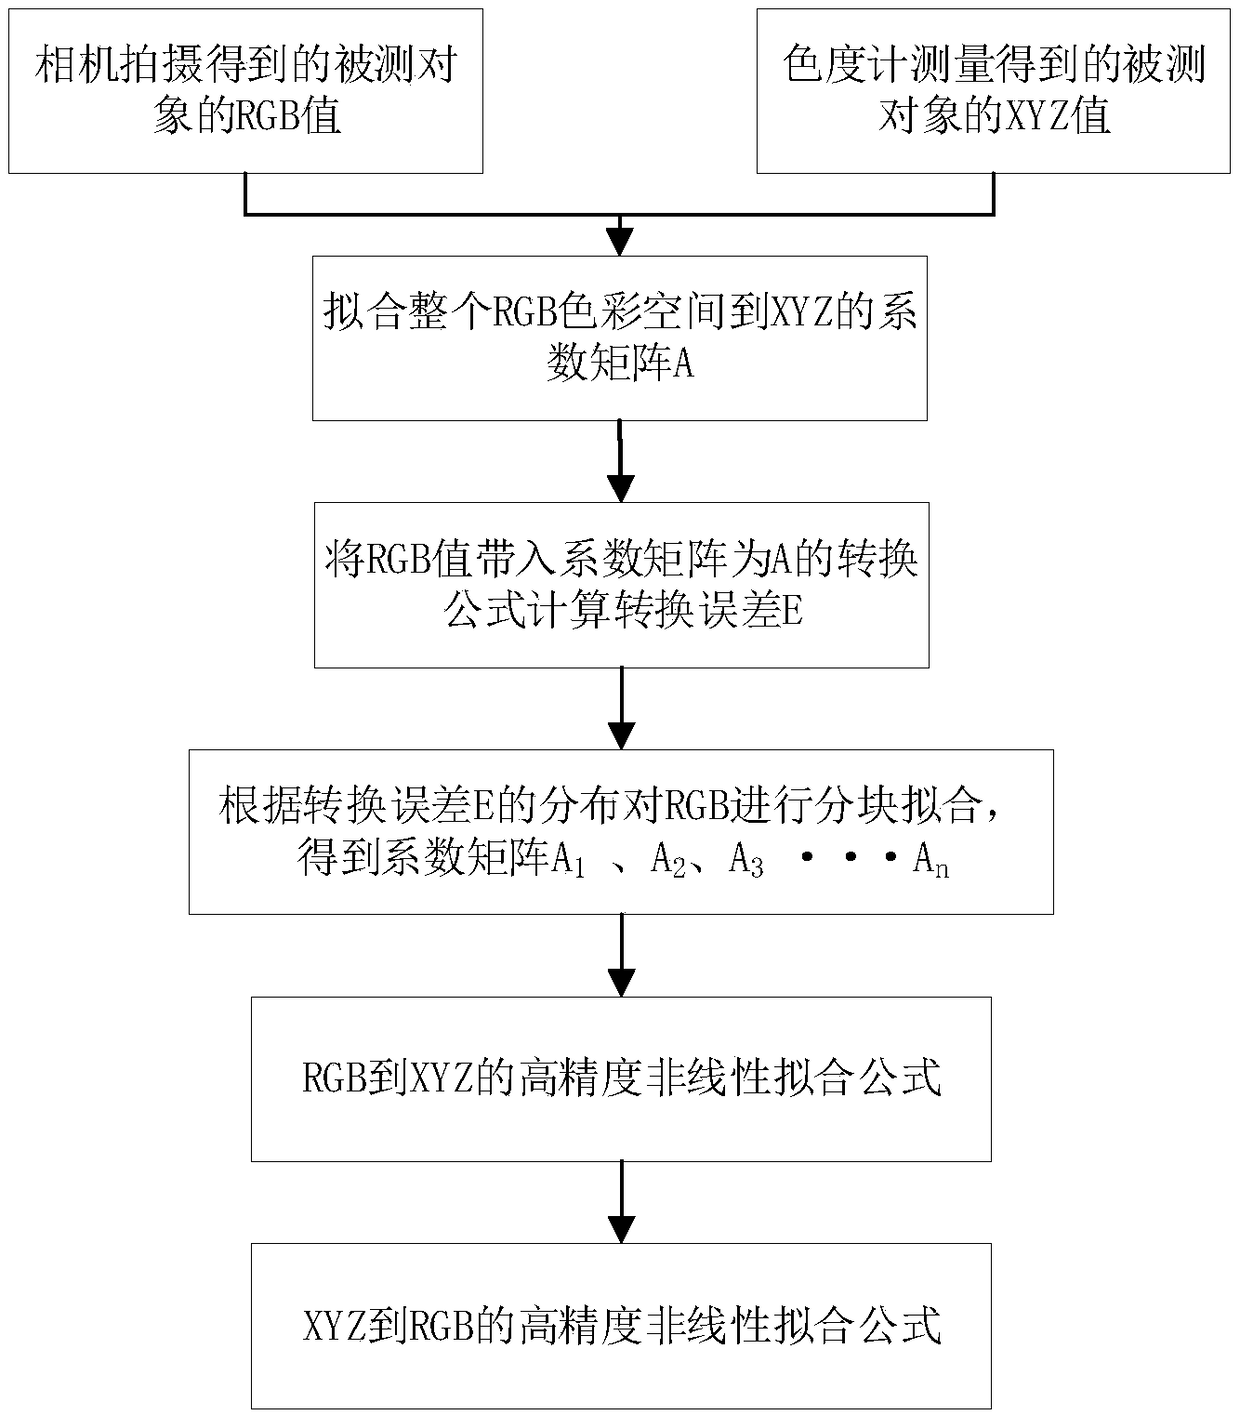 Embedded camera based chromaticity measurement device and method